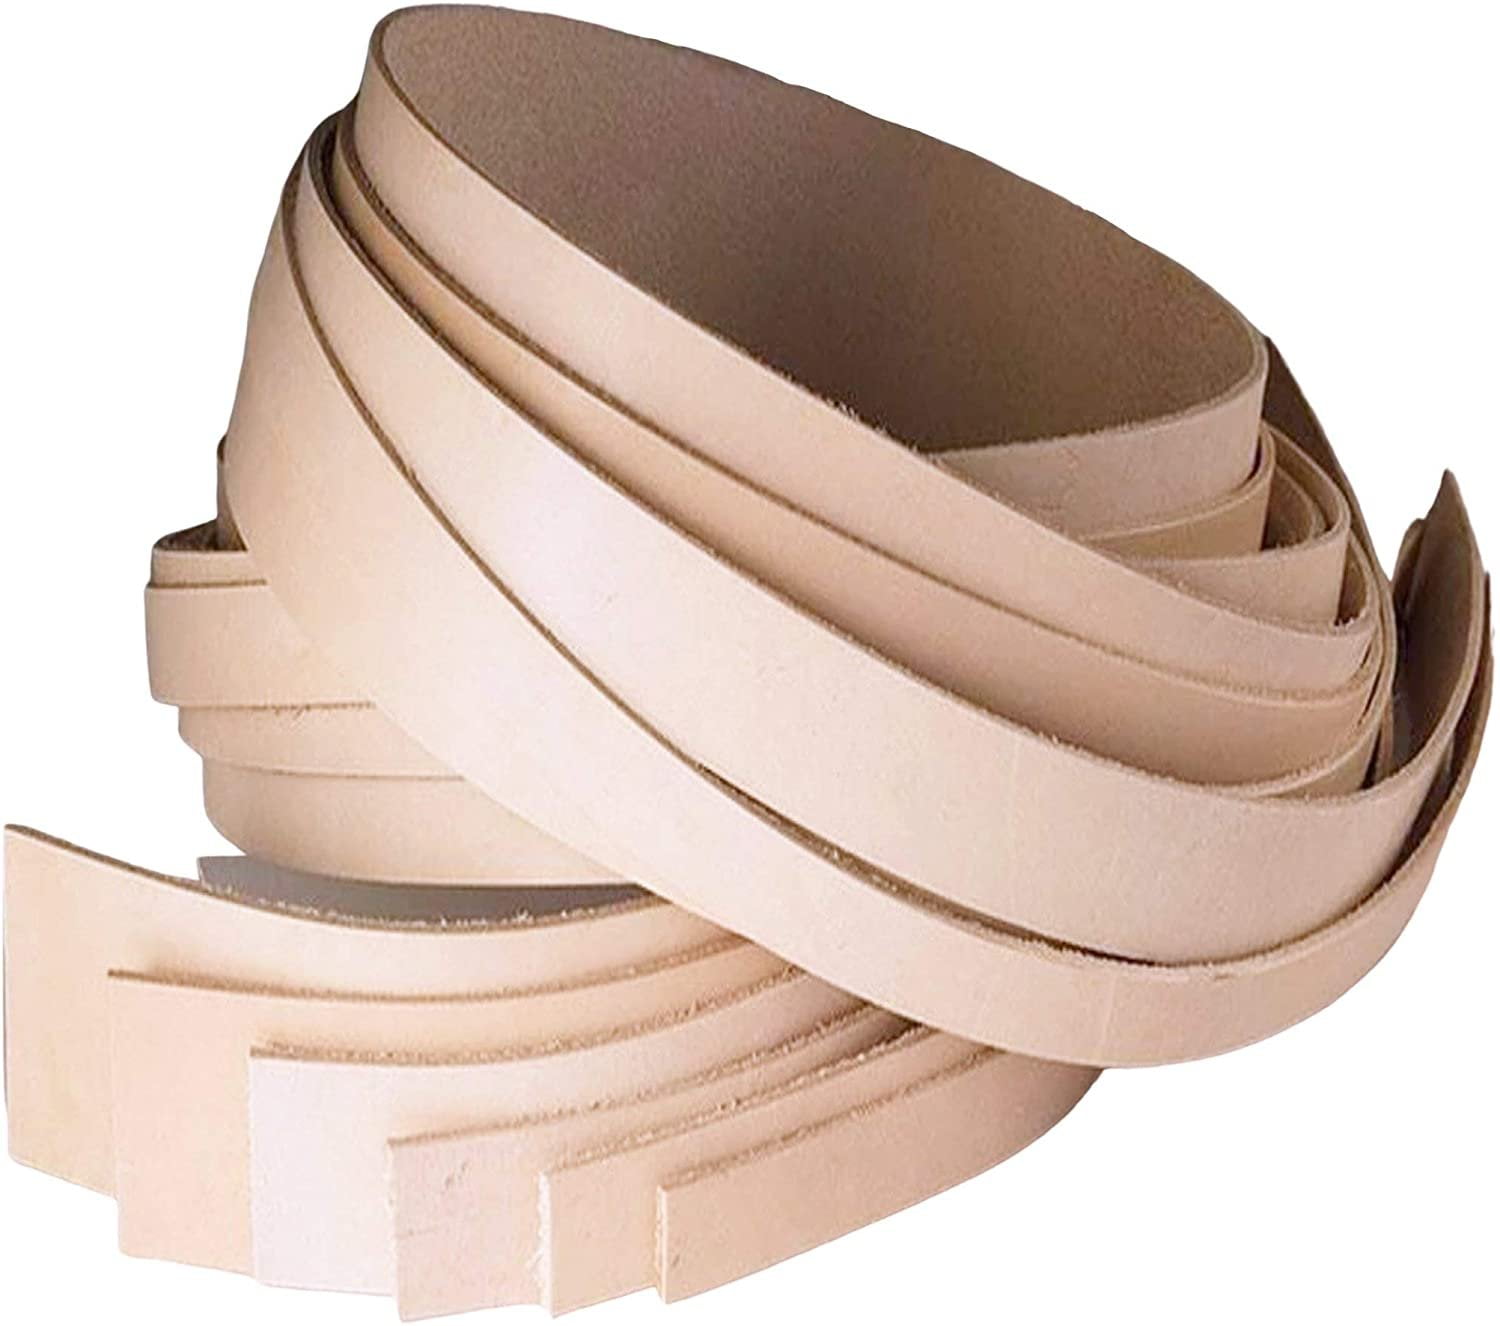 1.8-2mm Thickness|Cowhide... ELW Leather Belt Blanks/Strips/Straps 4-5 oz. 